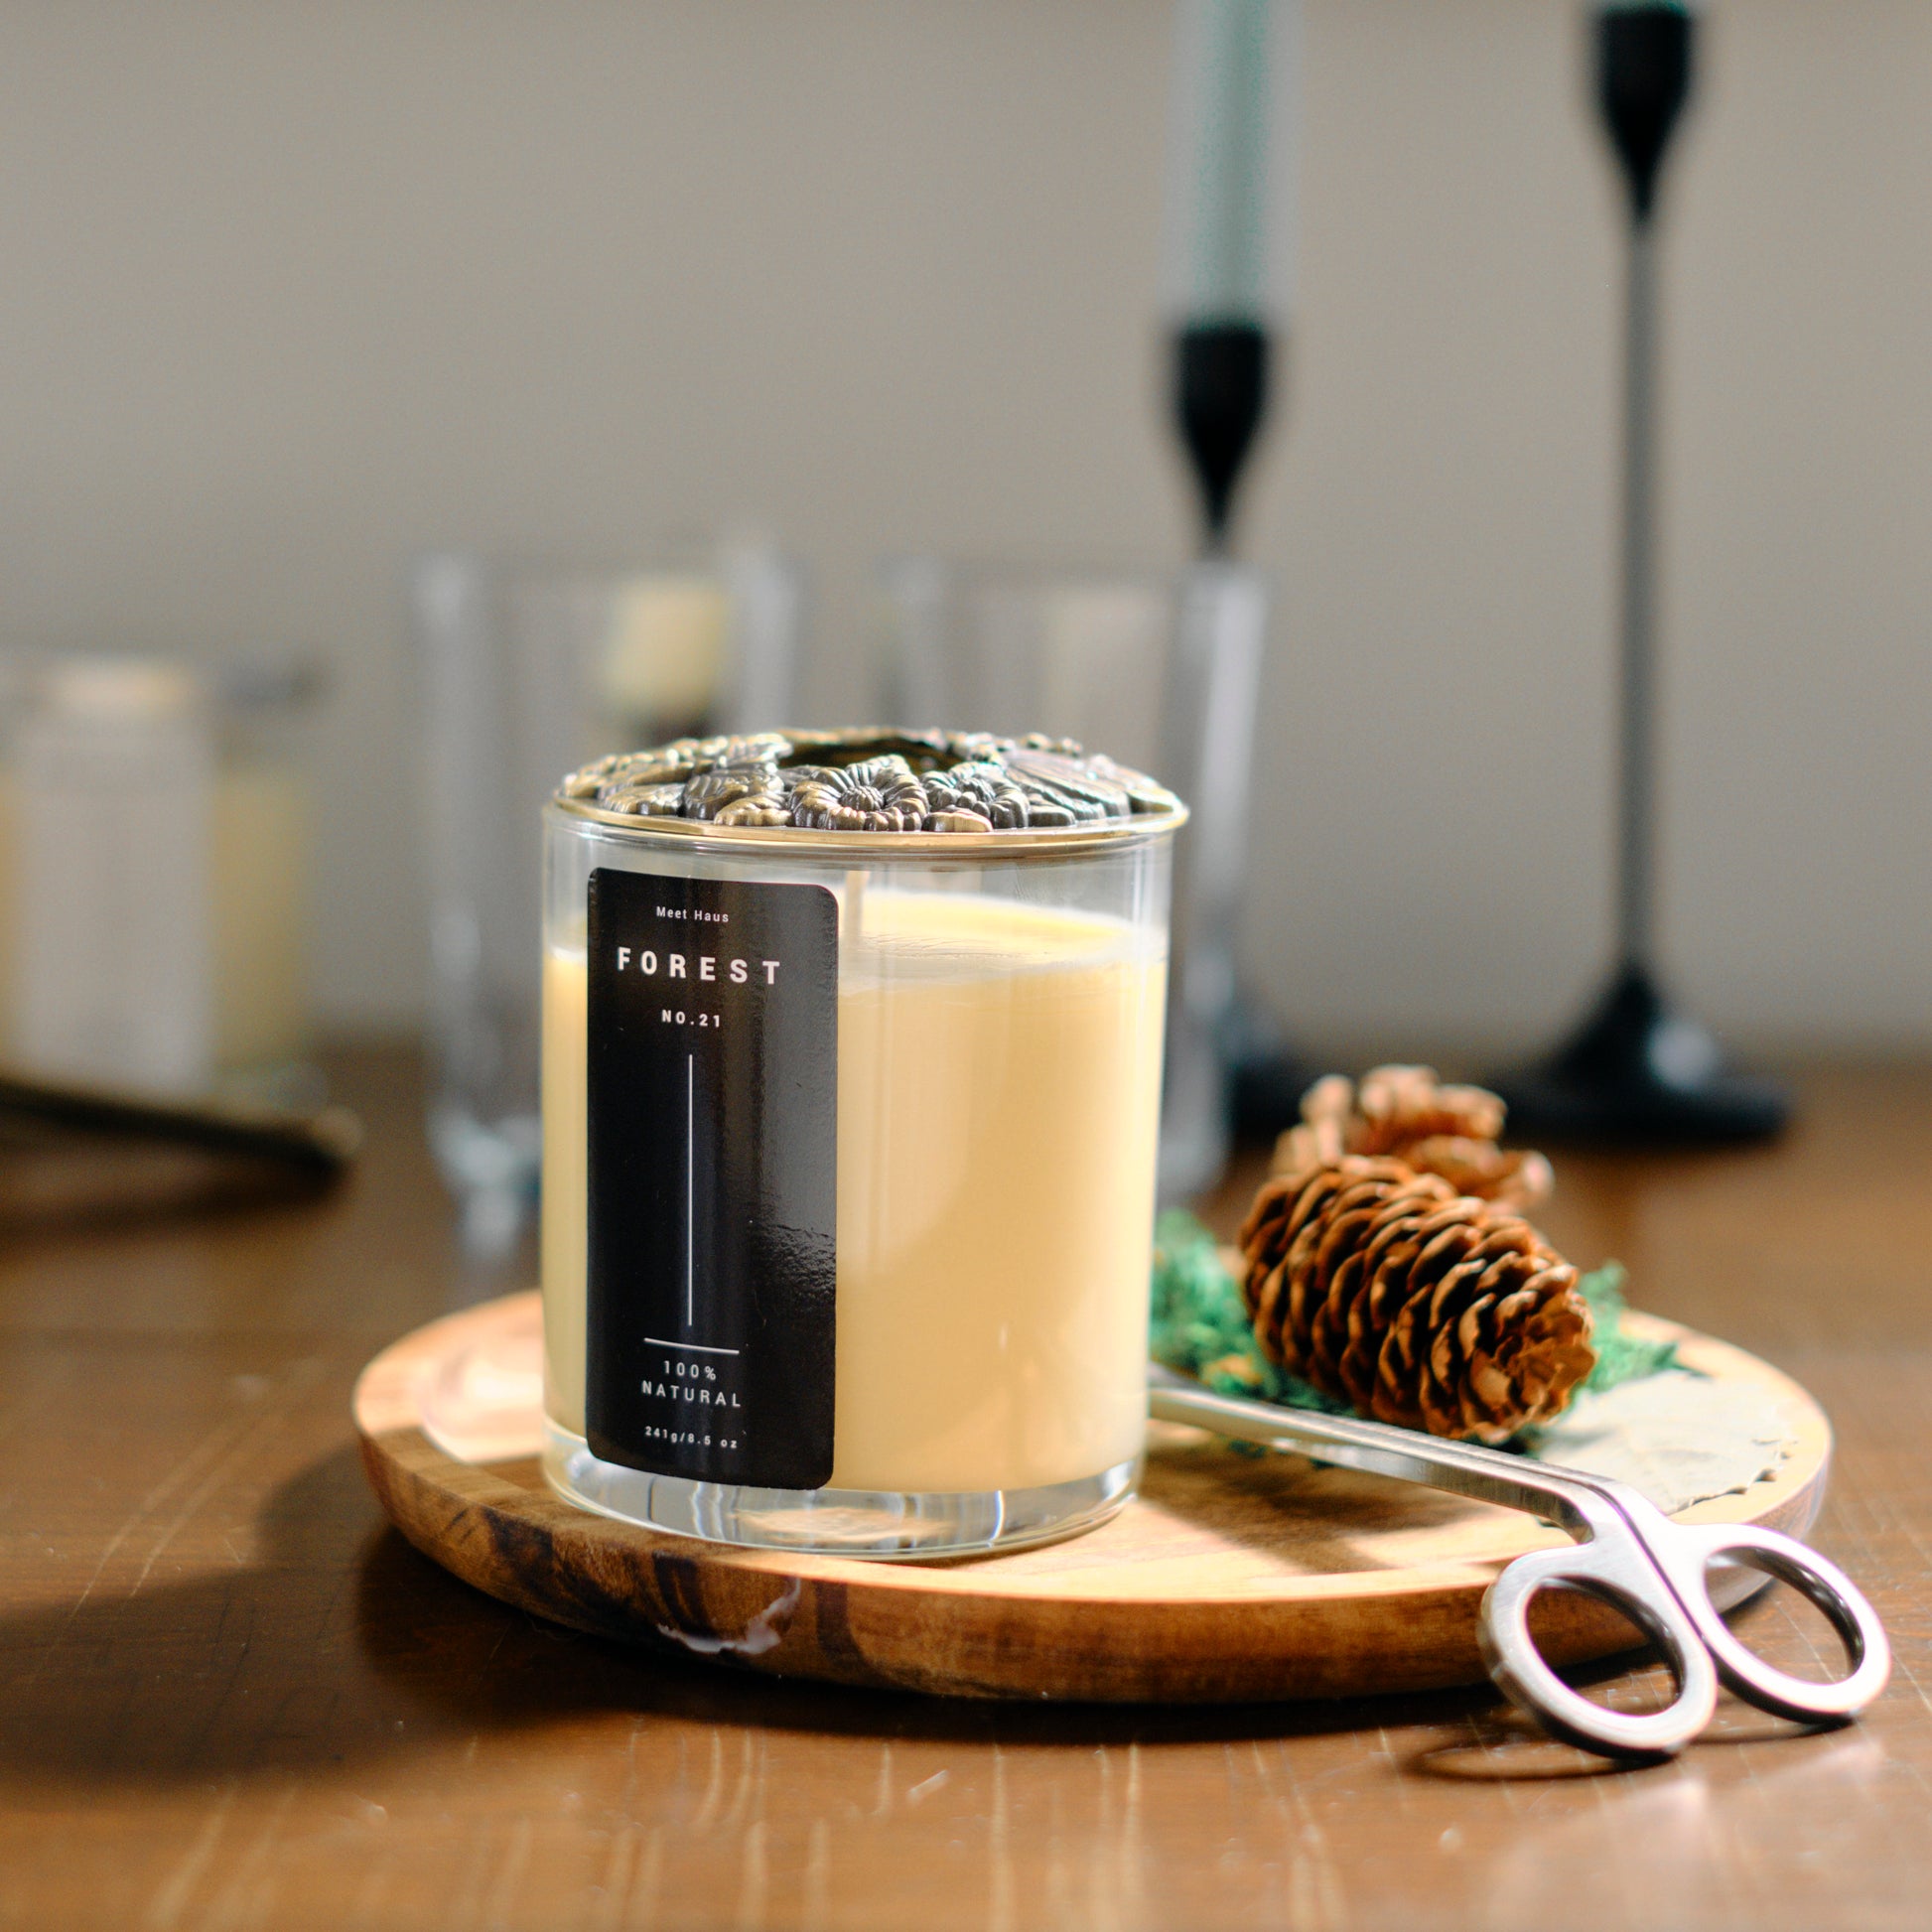 A Meet Haus Forest No. 21 candle, with a pine cone and a pair of scissors on a wooden tray, is set against a blurred background featuring elegant candle holders.